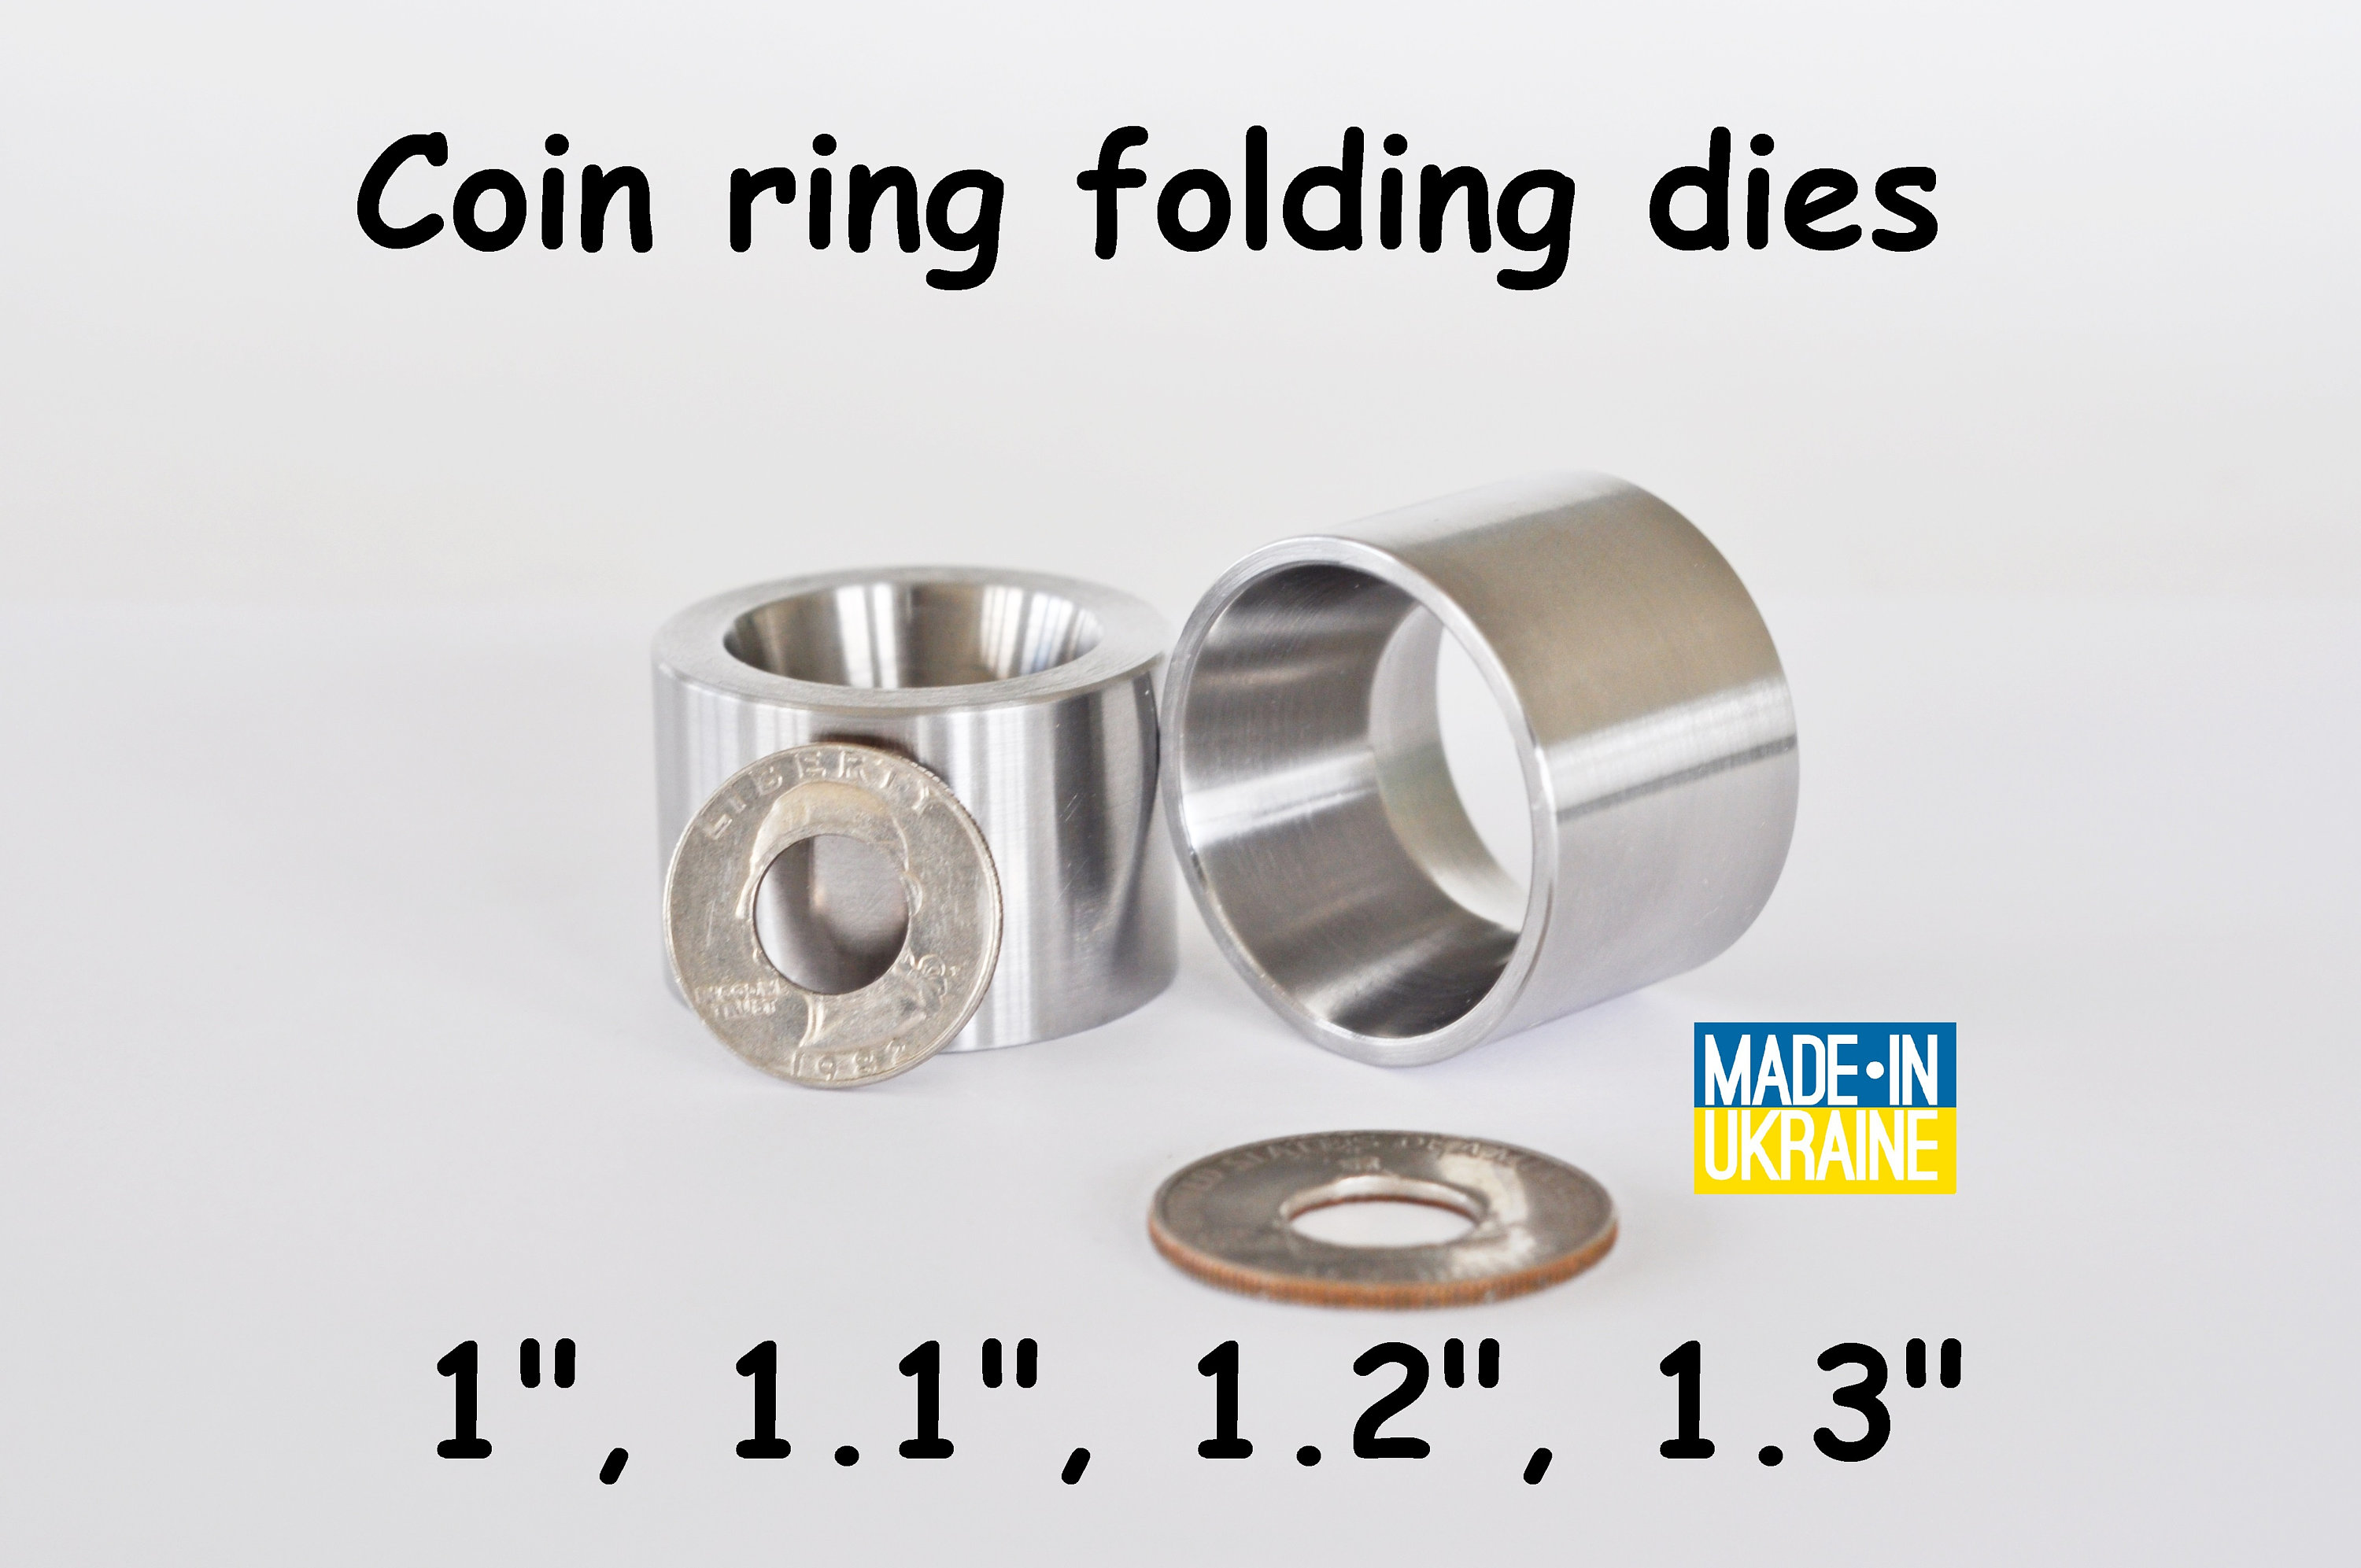 17 DEGREE Folding Die (1.3″ x 1.4″) for making coin rings Stainless Steel –  Legacy Brand Coin Ring Tools